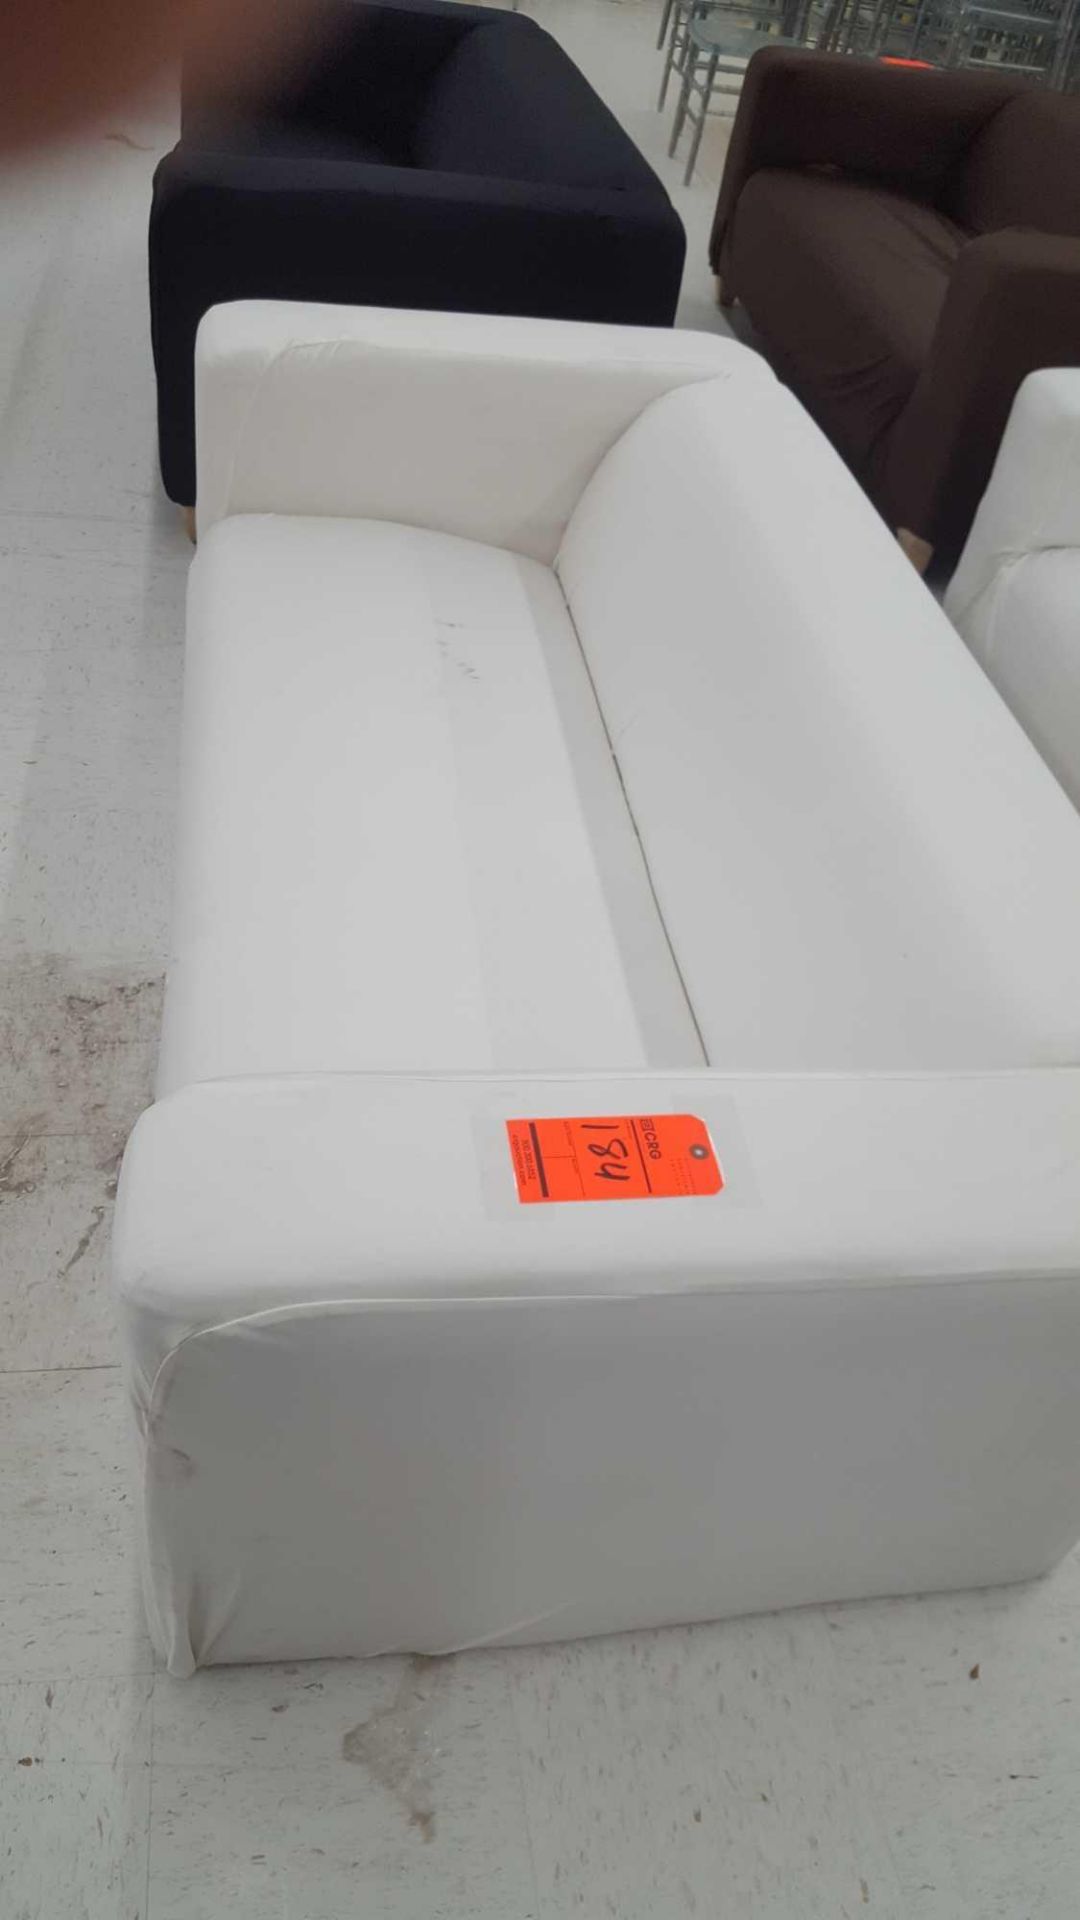 Lot of (3) assorted sofas with white slipcovers, no legs - Image 4 of 4